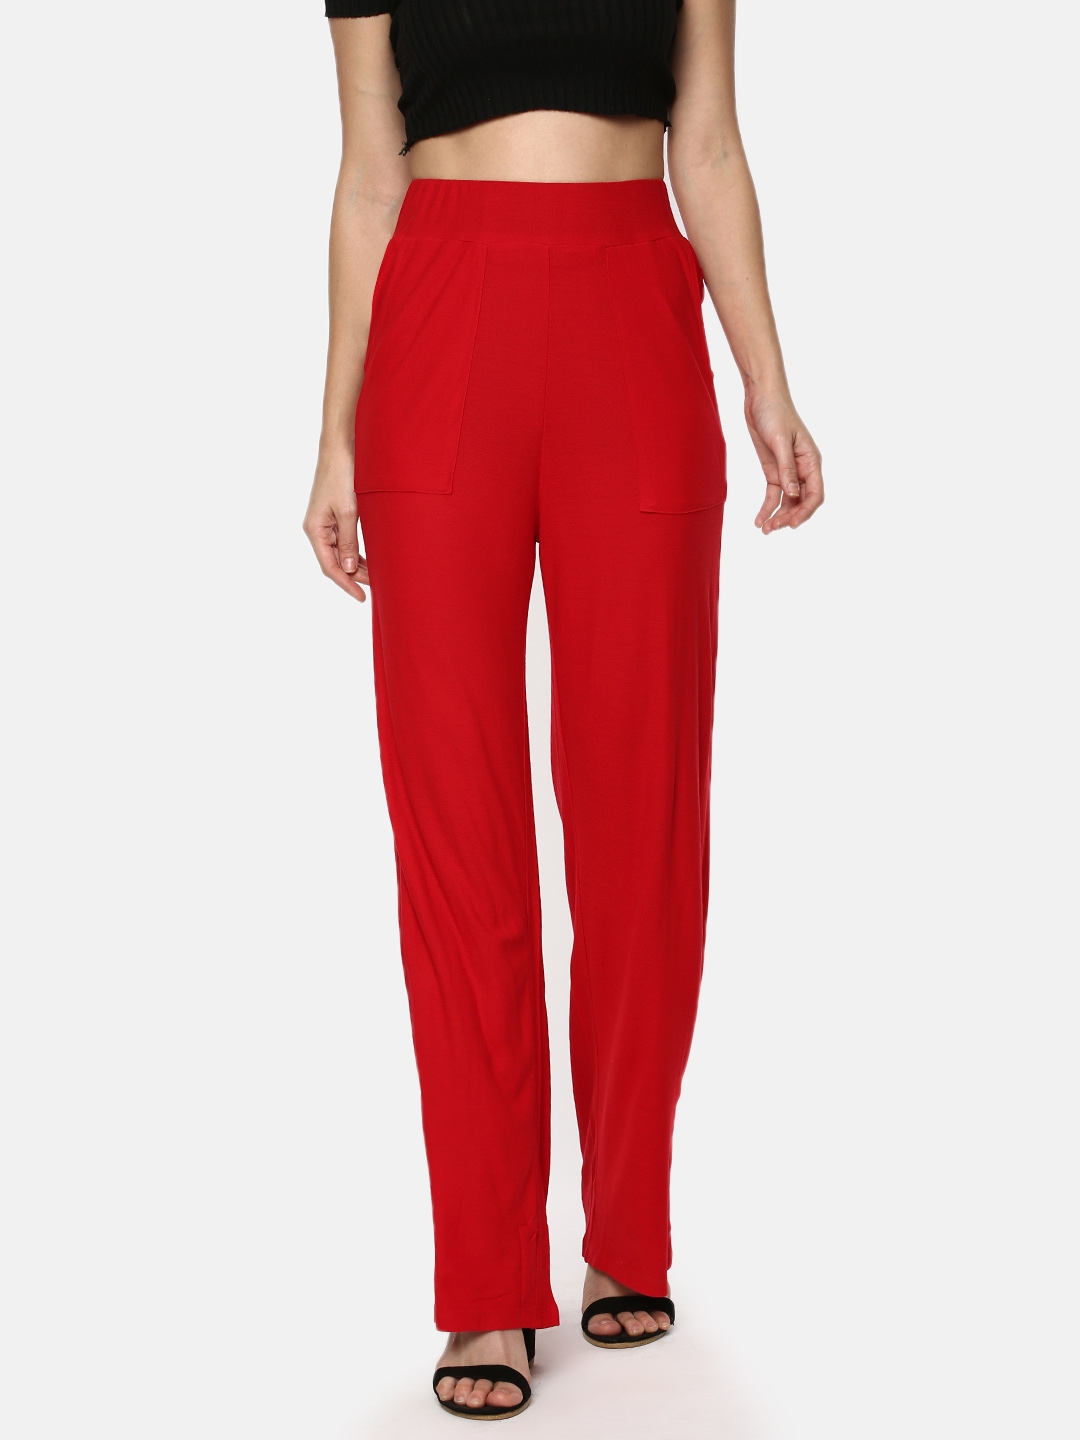 Y CAN F | YCANF Women's Casual Red Palazzos 0